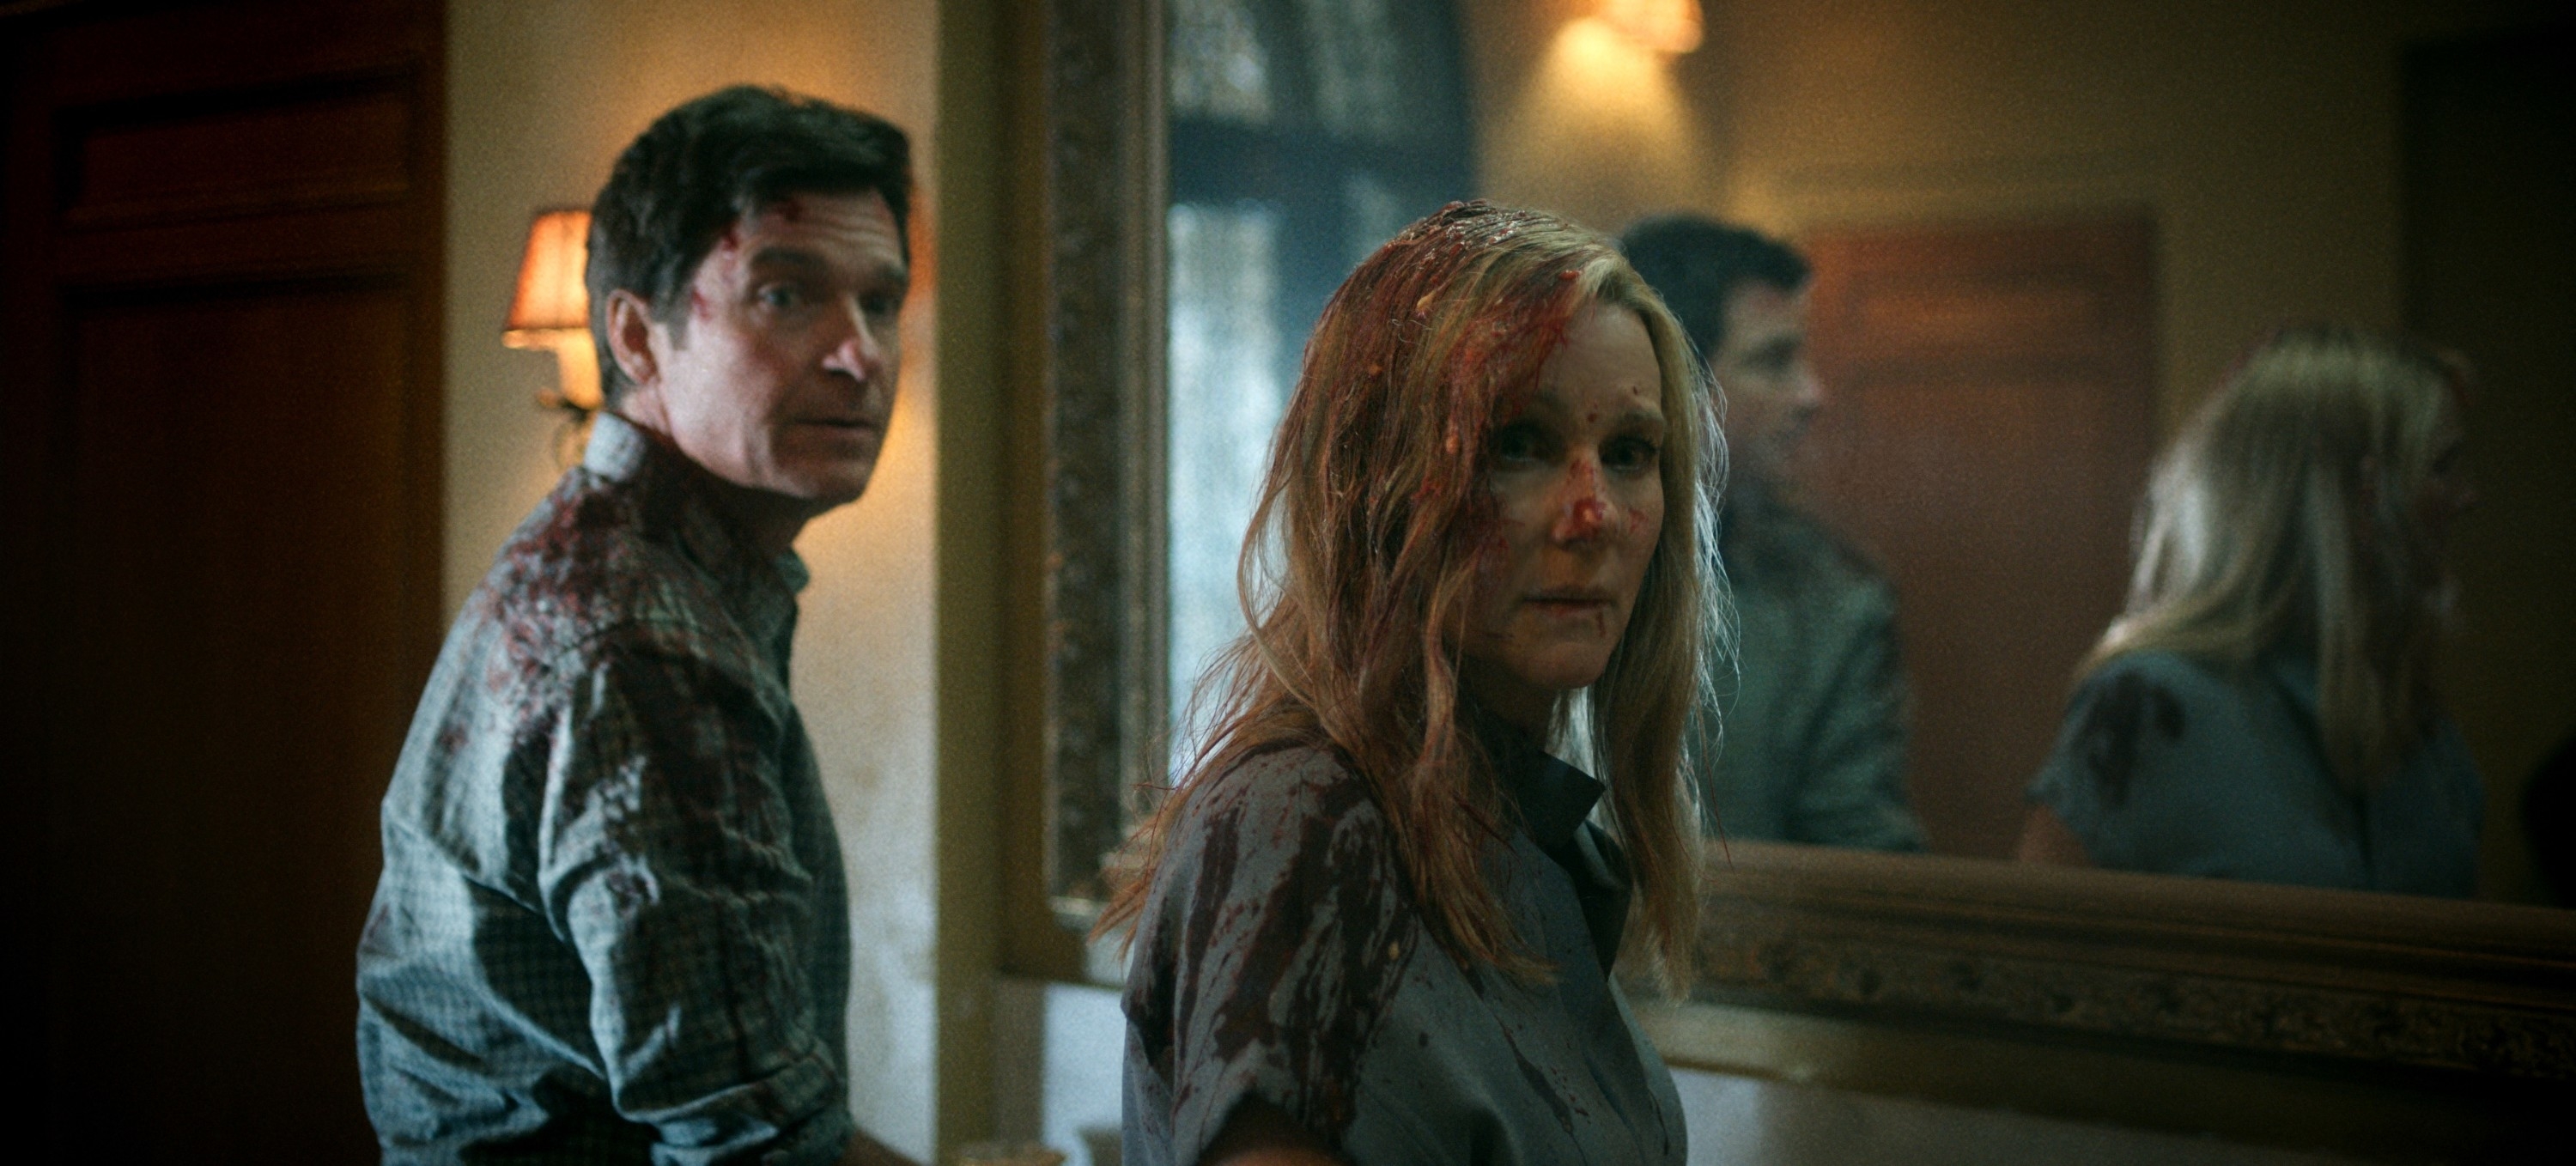 Two actors portraying distress, with simulated blood on their faces and clothing, in a dramatic scene